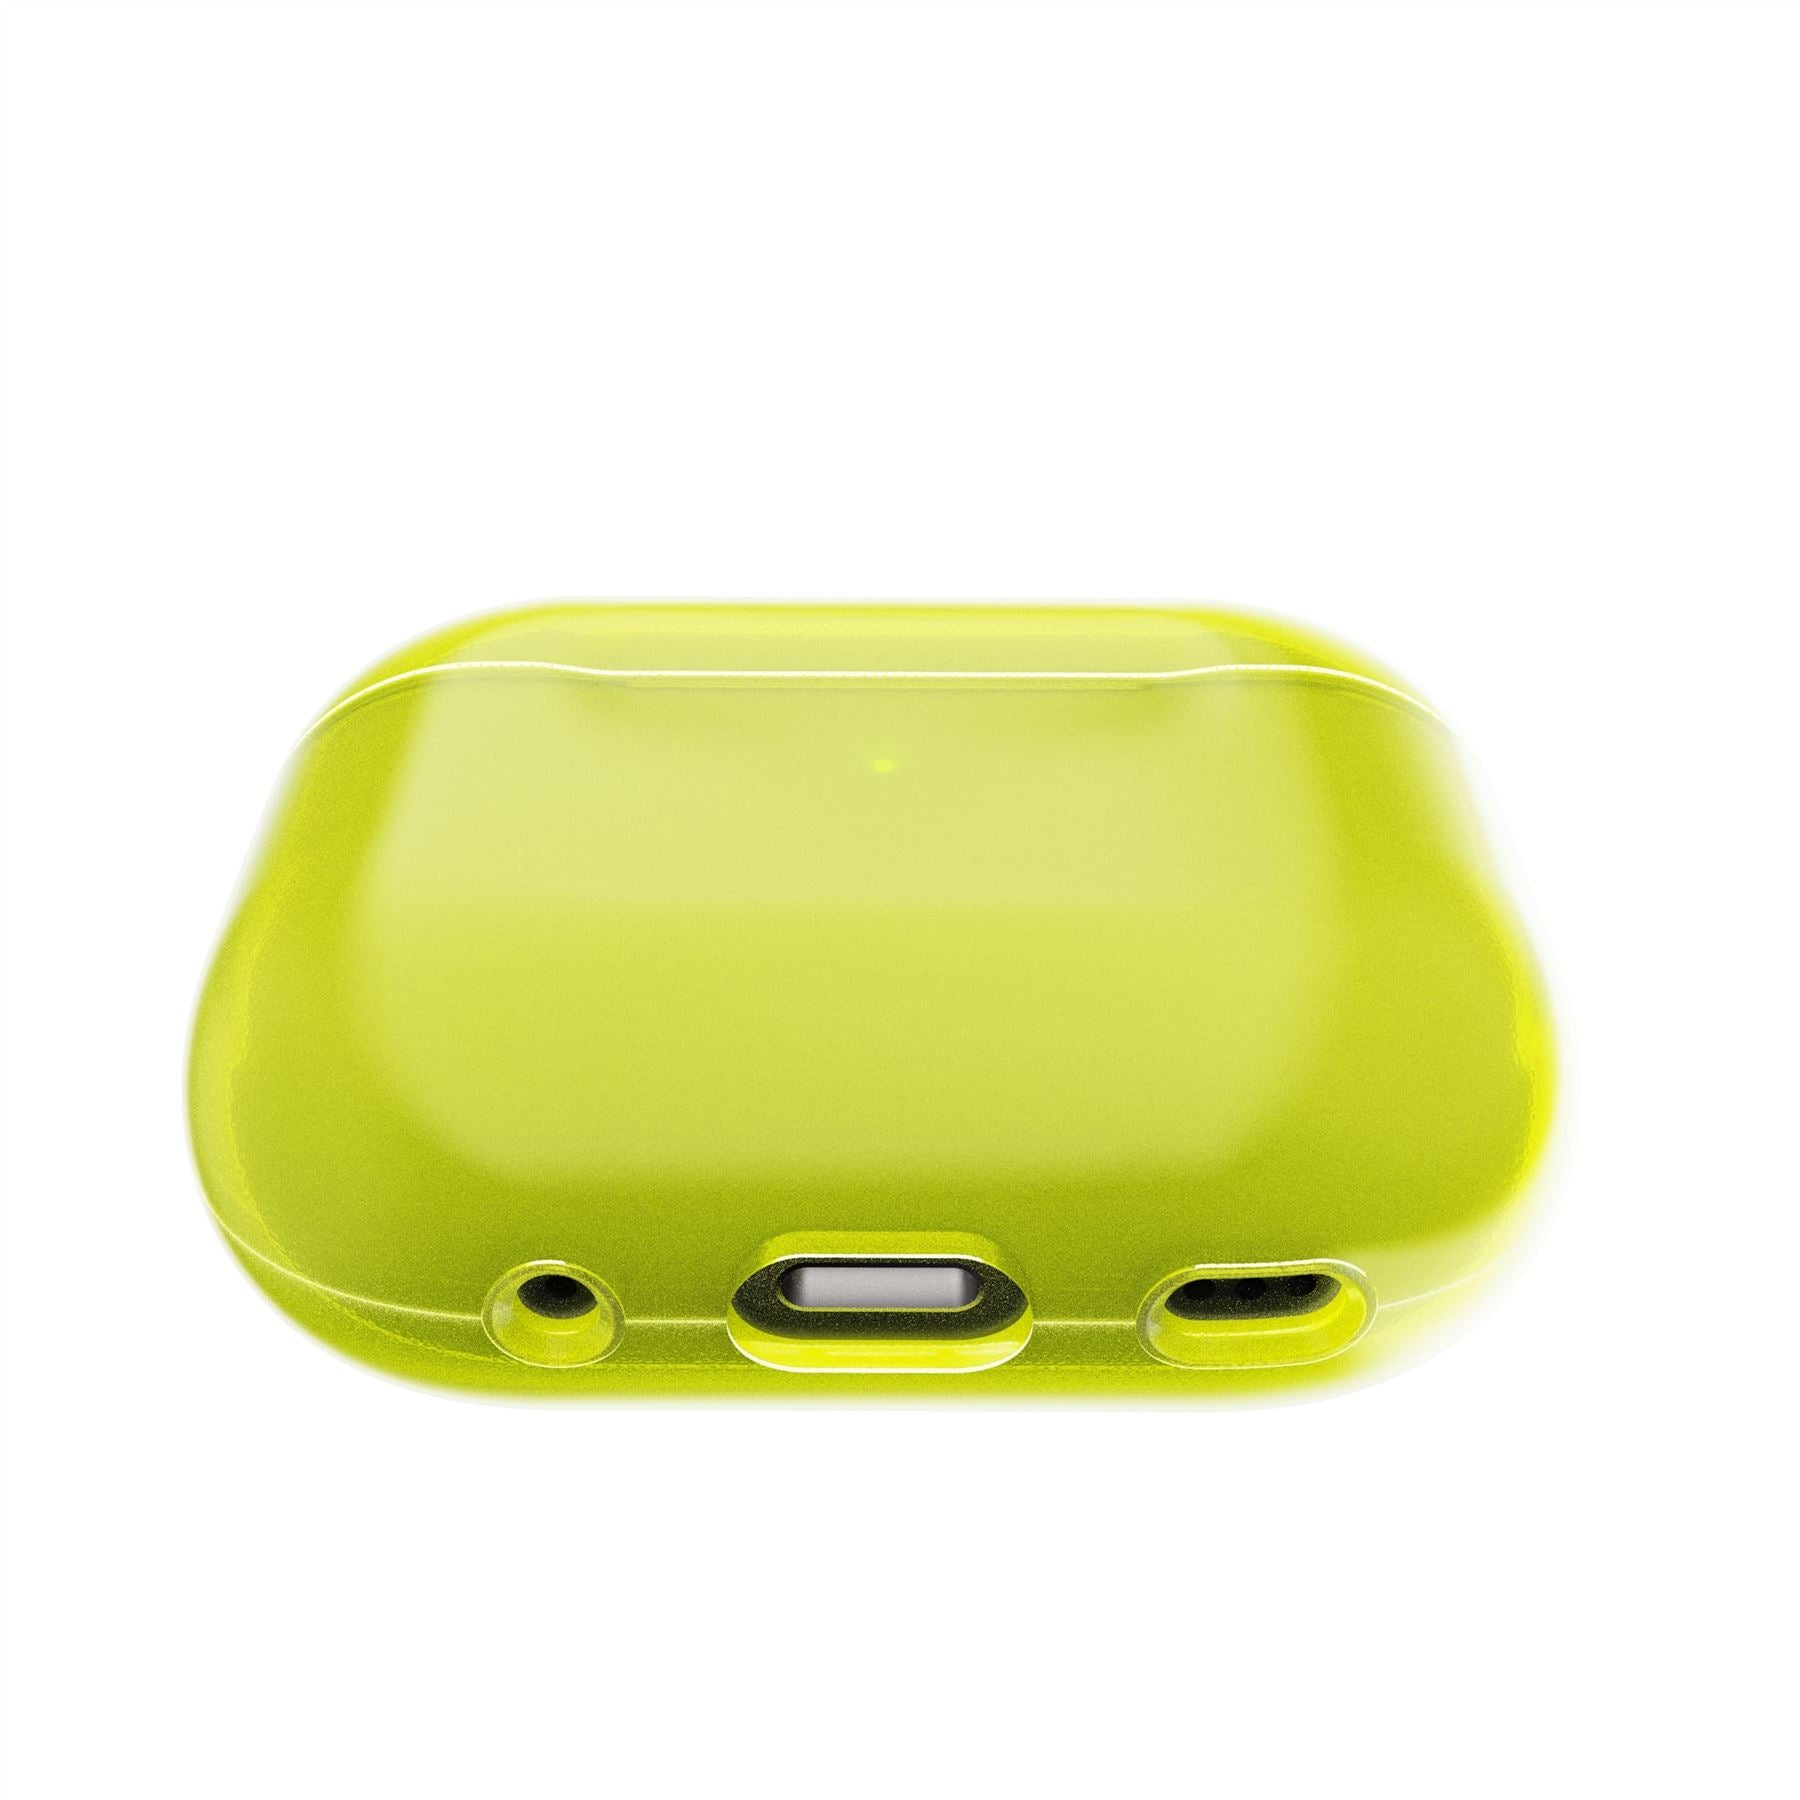 EvoPop - Apple AirPods Pro 2 Case - Cyber Lime